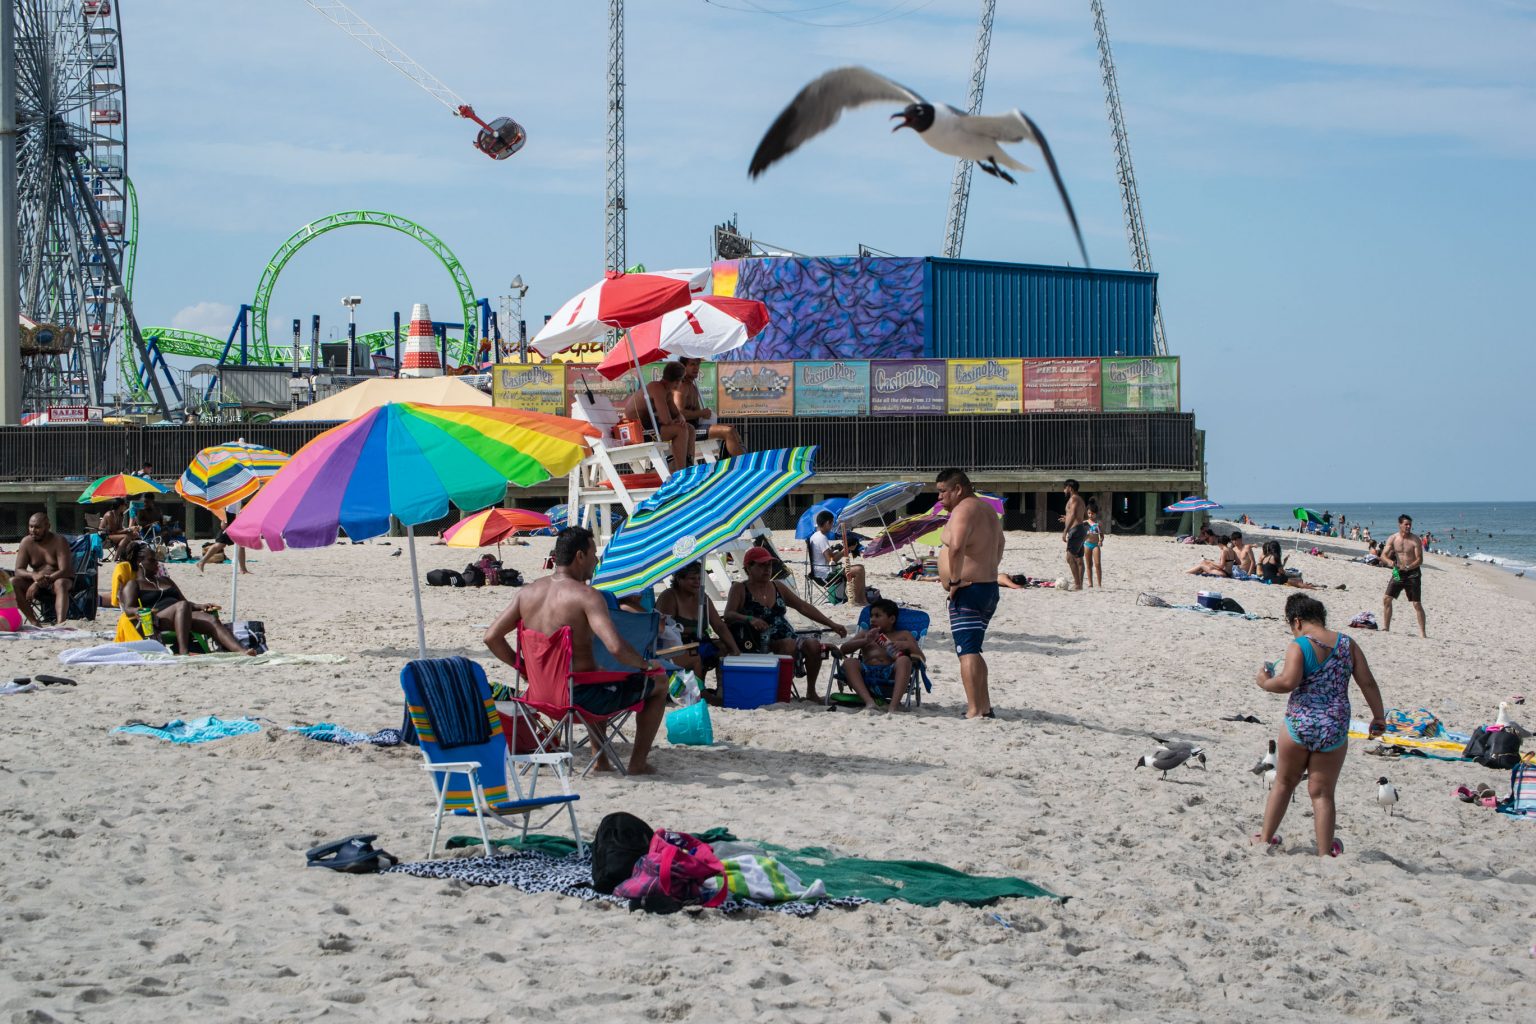 Seaside Heights Beach Badge Prices to Rise Next Two Years for